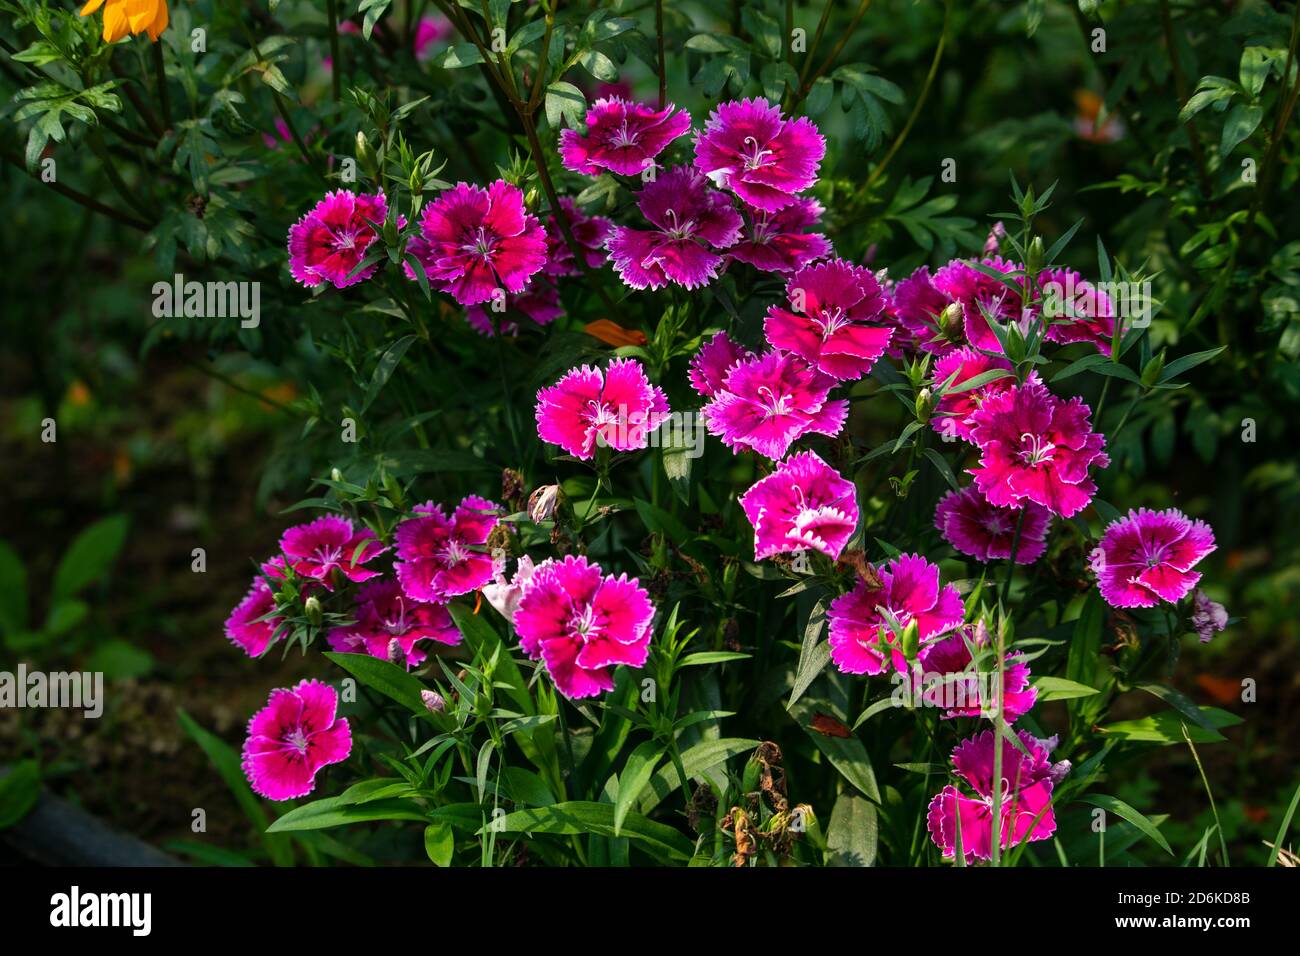 Pink Dianthus Chinensis or China Pink flowers in a garden. The background is full of green leaves Stock Photo